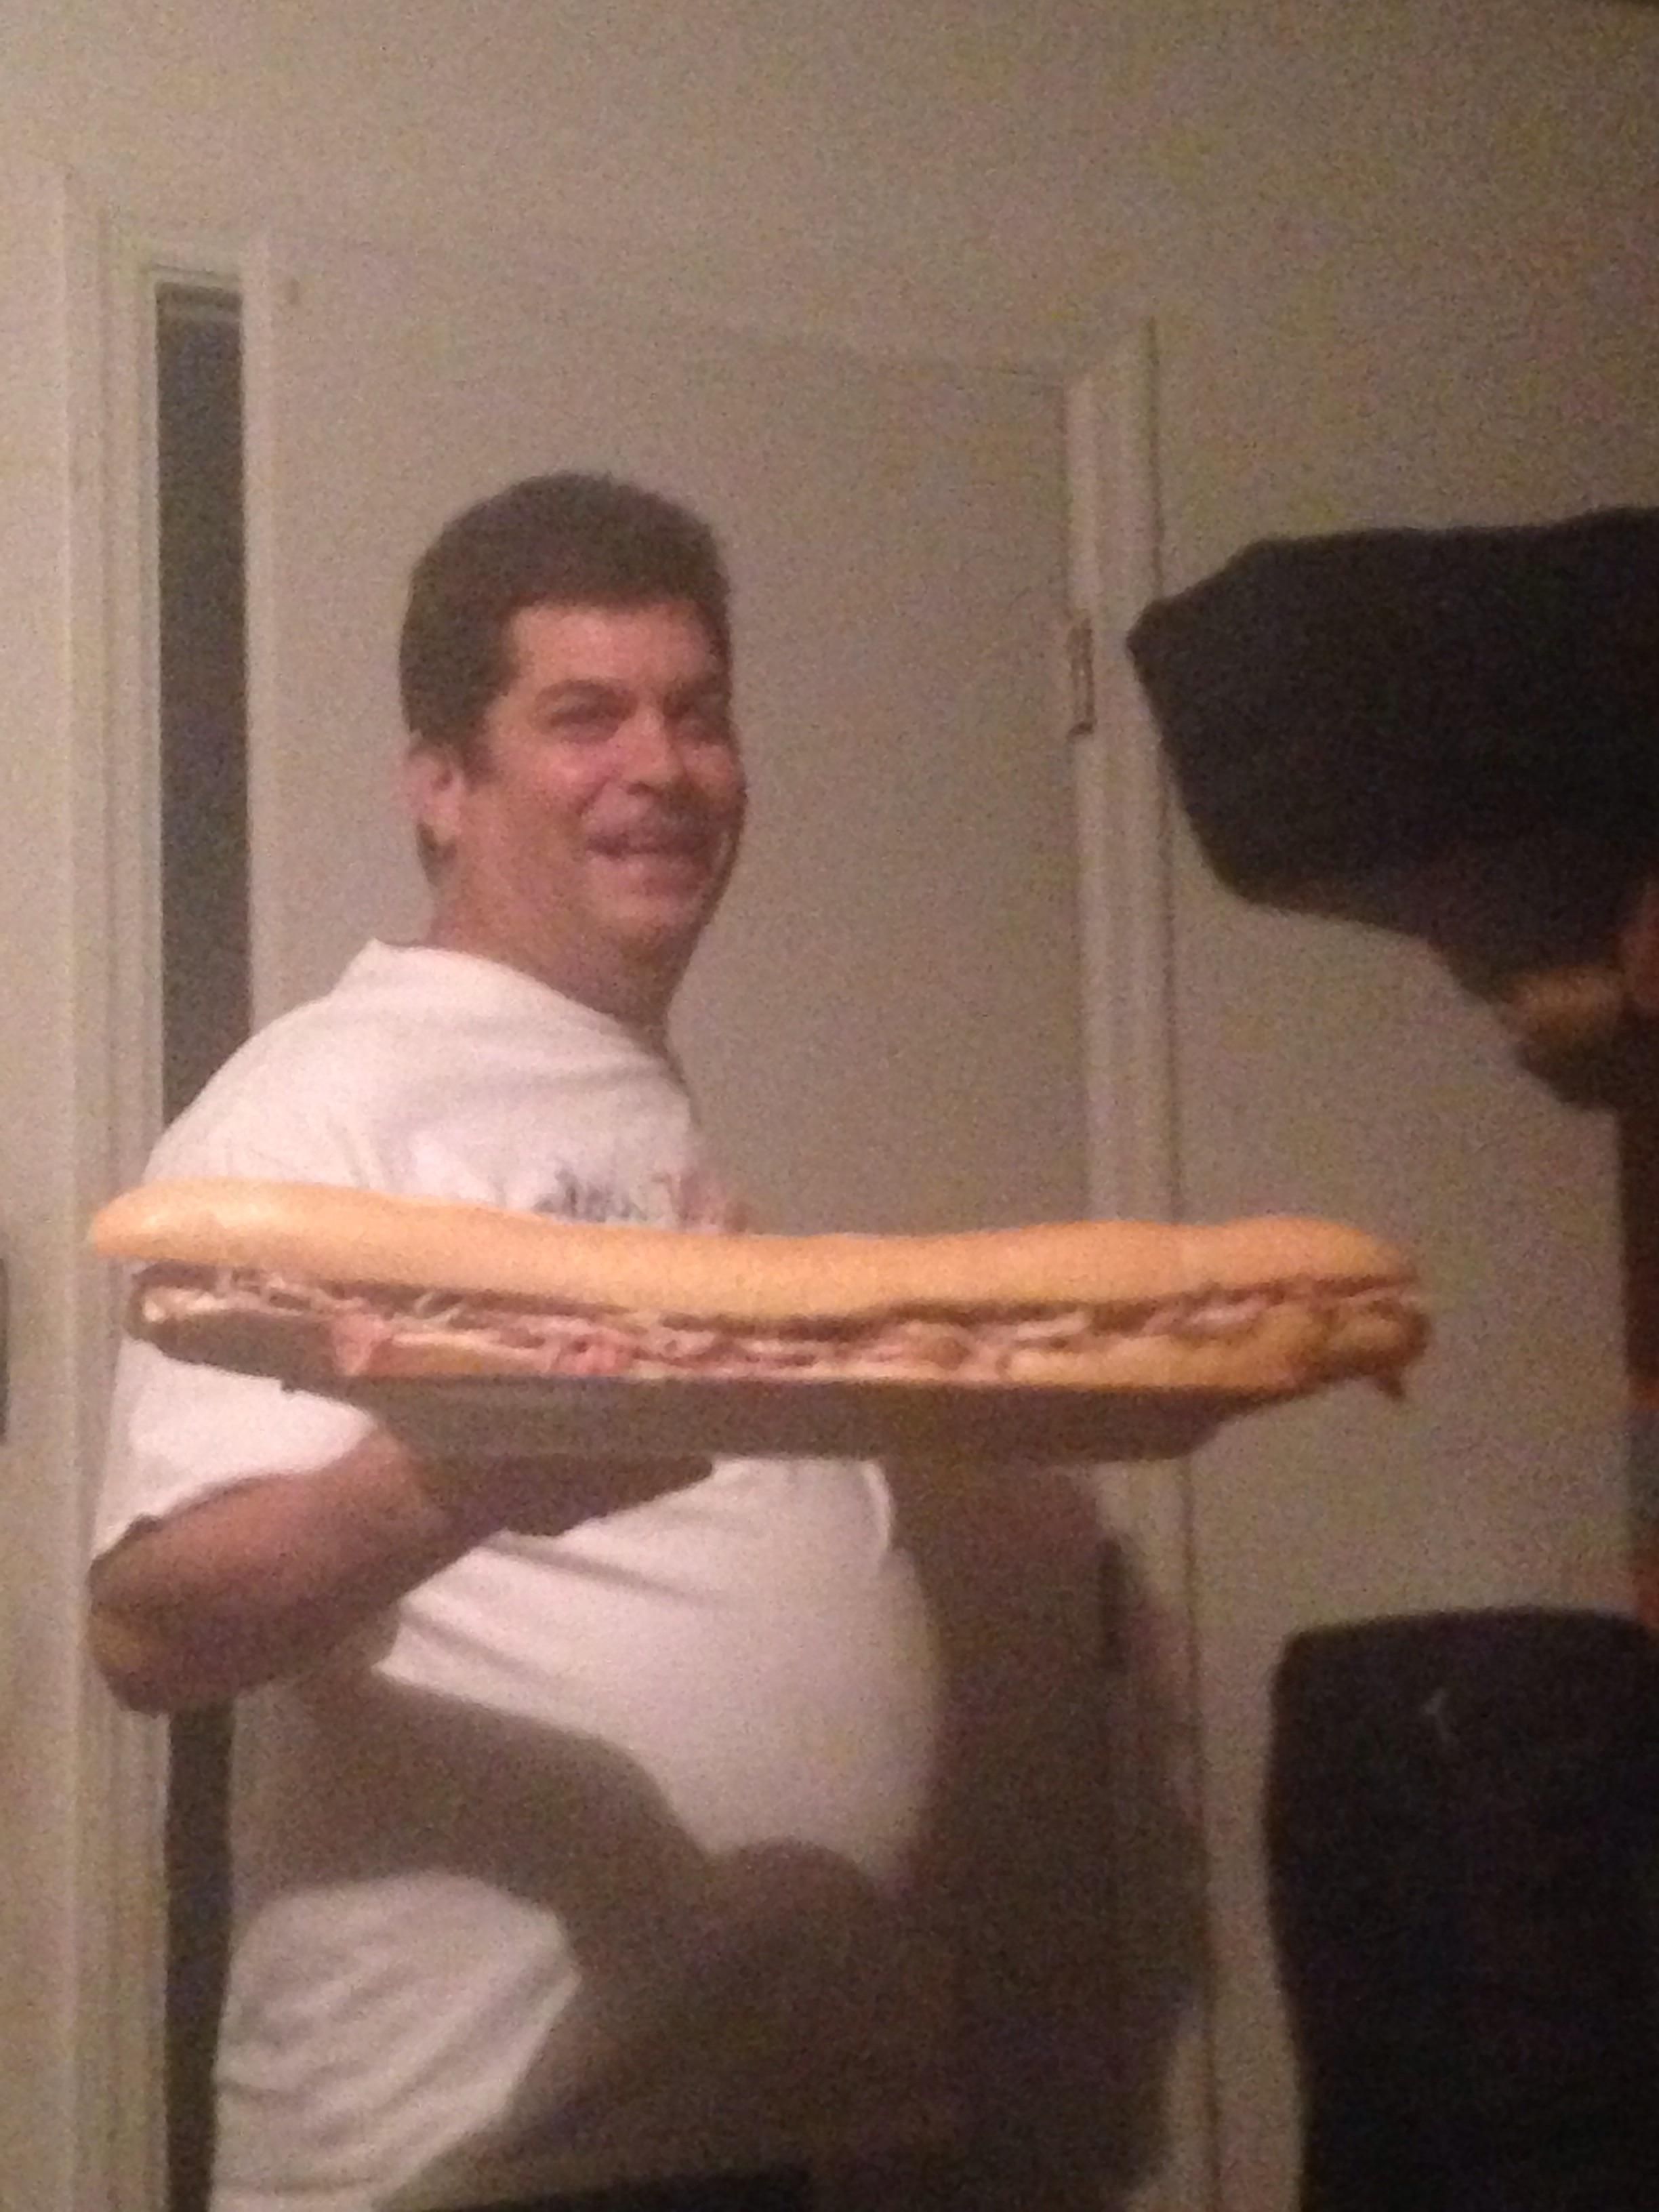 Wish some one felt the same way about me as my friends dad feels about this big ass sandwich he just made.